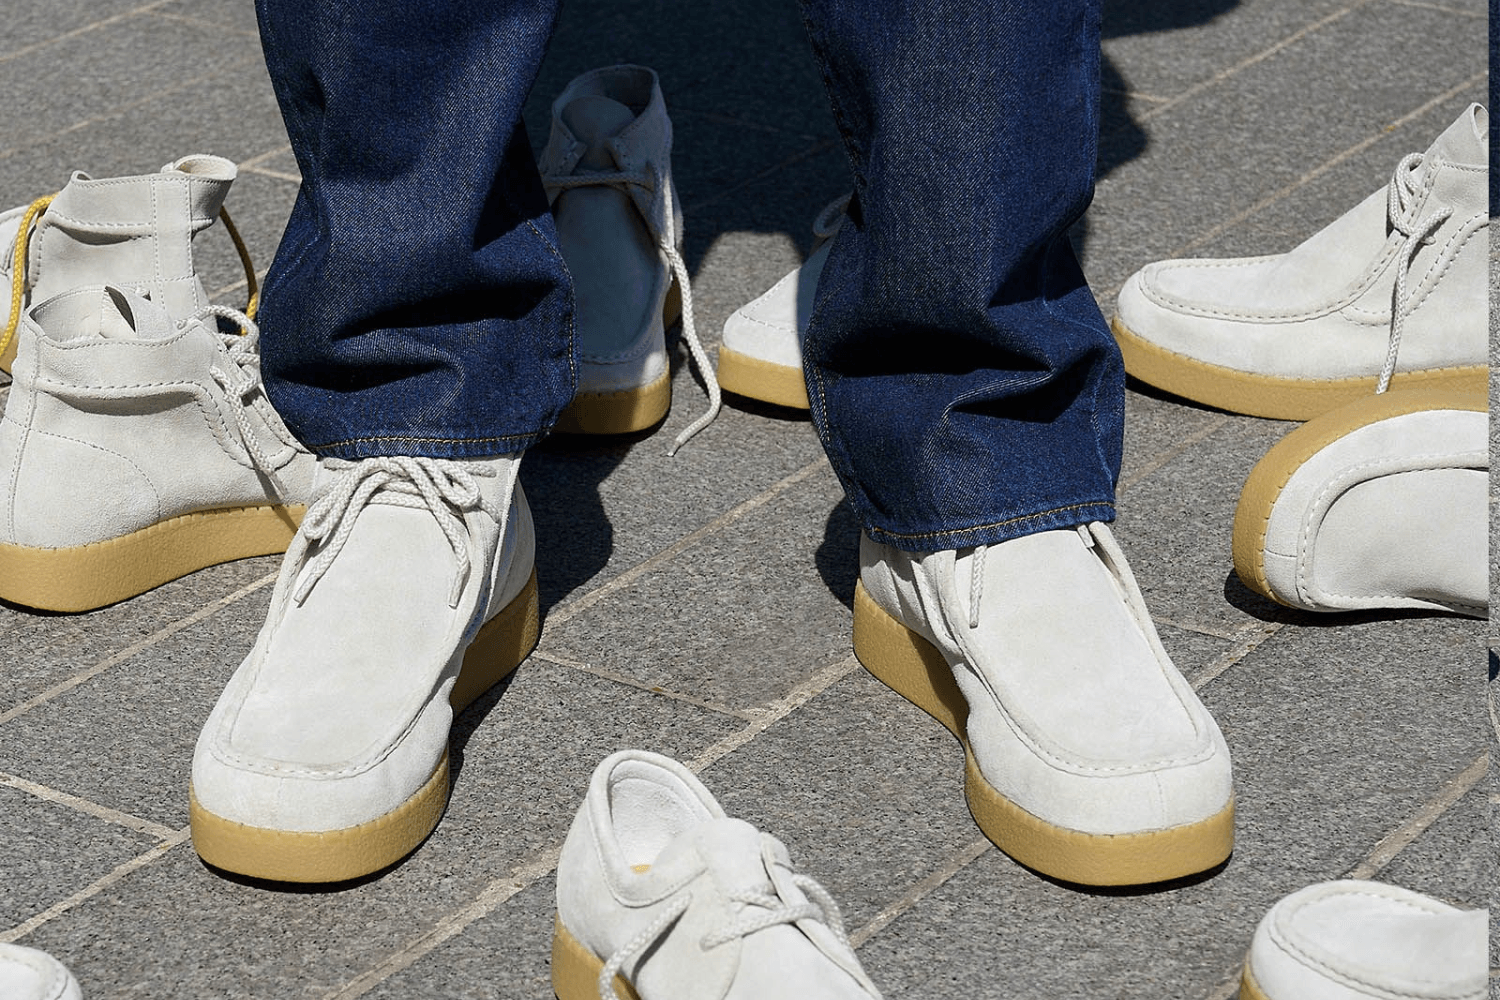 Levi's steps back in footwear game with the RVN 75 model